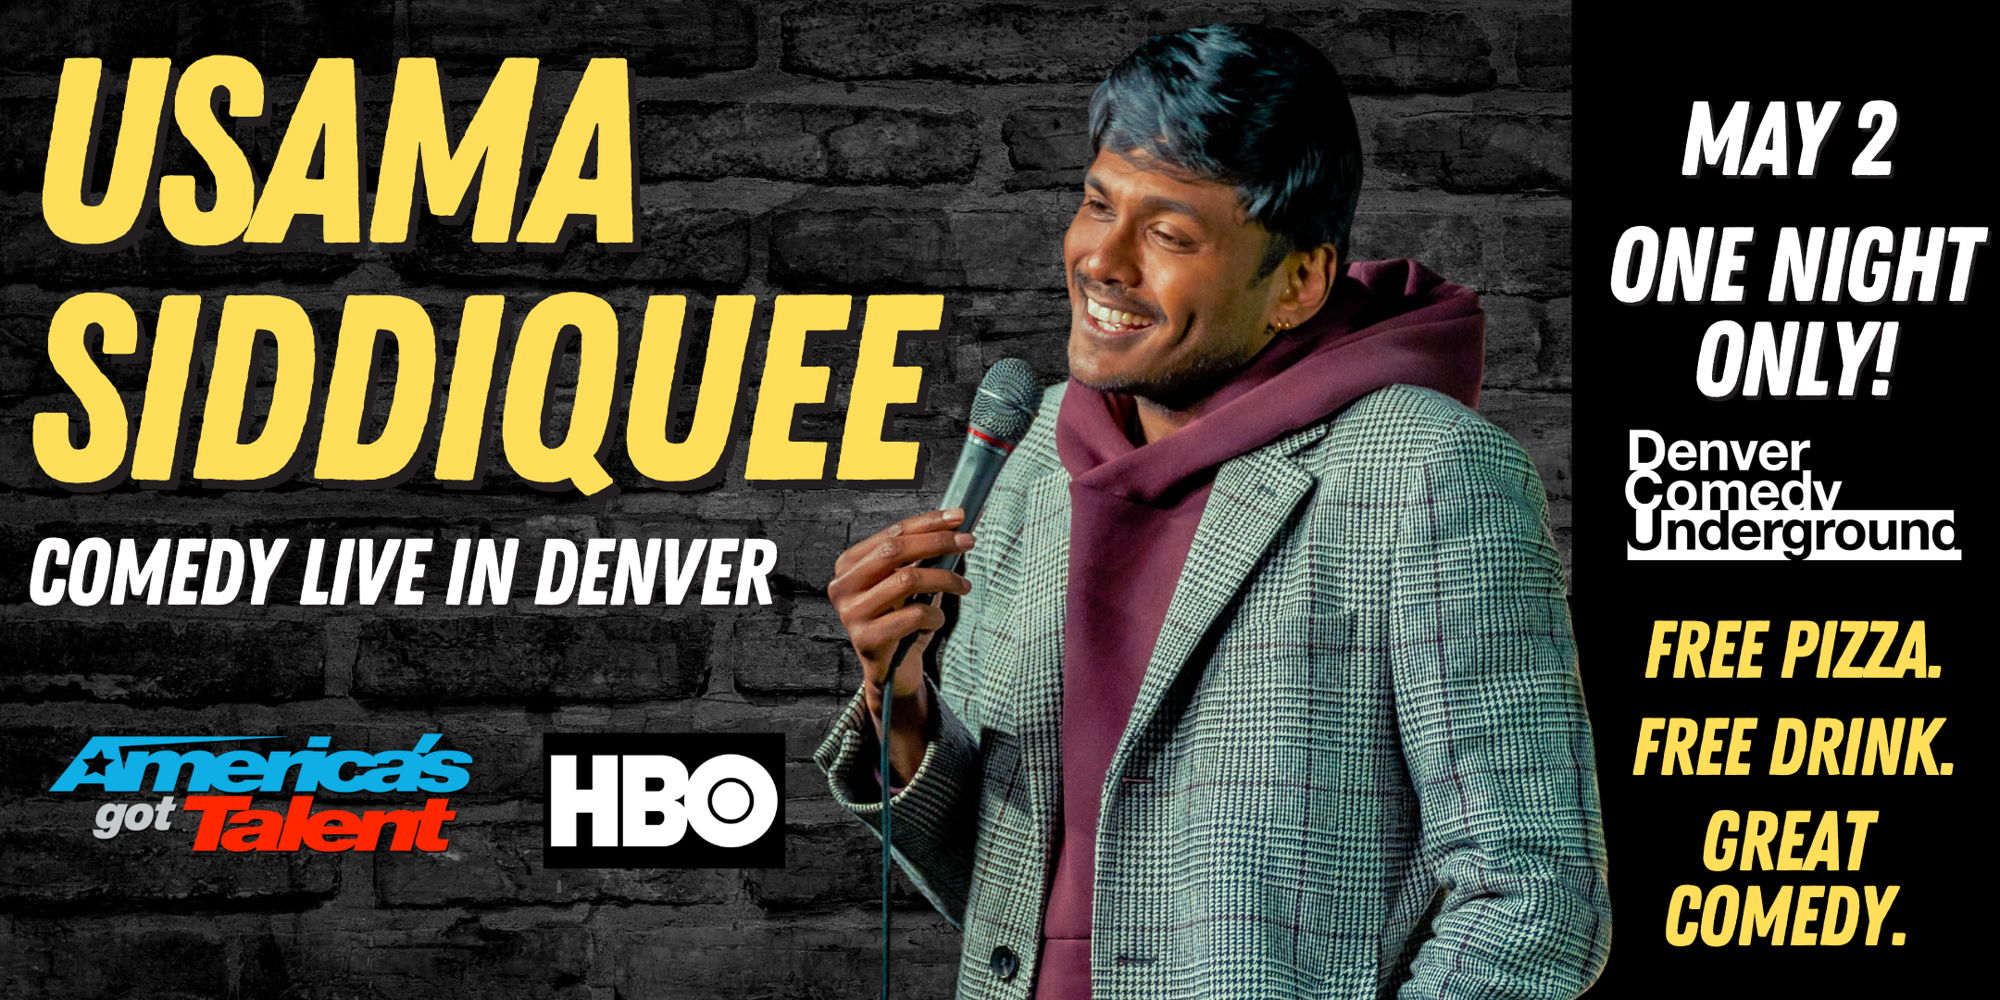 Denver Comedy Show With Headliner Usama Siddiquee (HBO, Netflix, MTV)! One Night Only! Free Pizza! Free Drink! promotional image